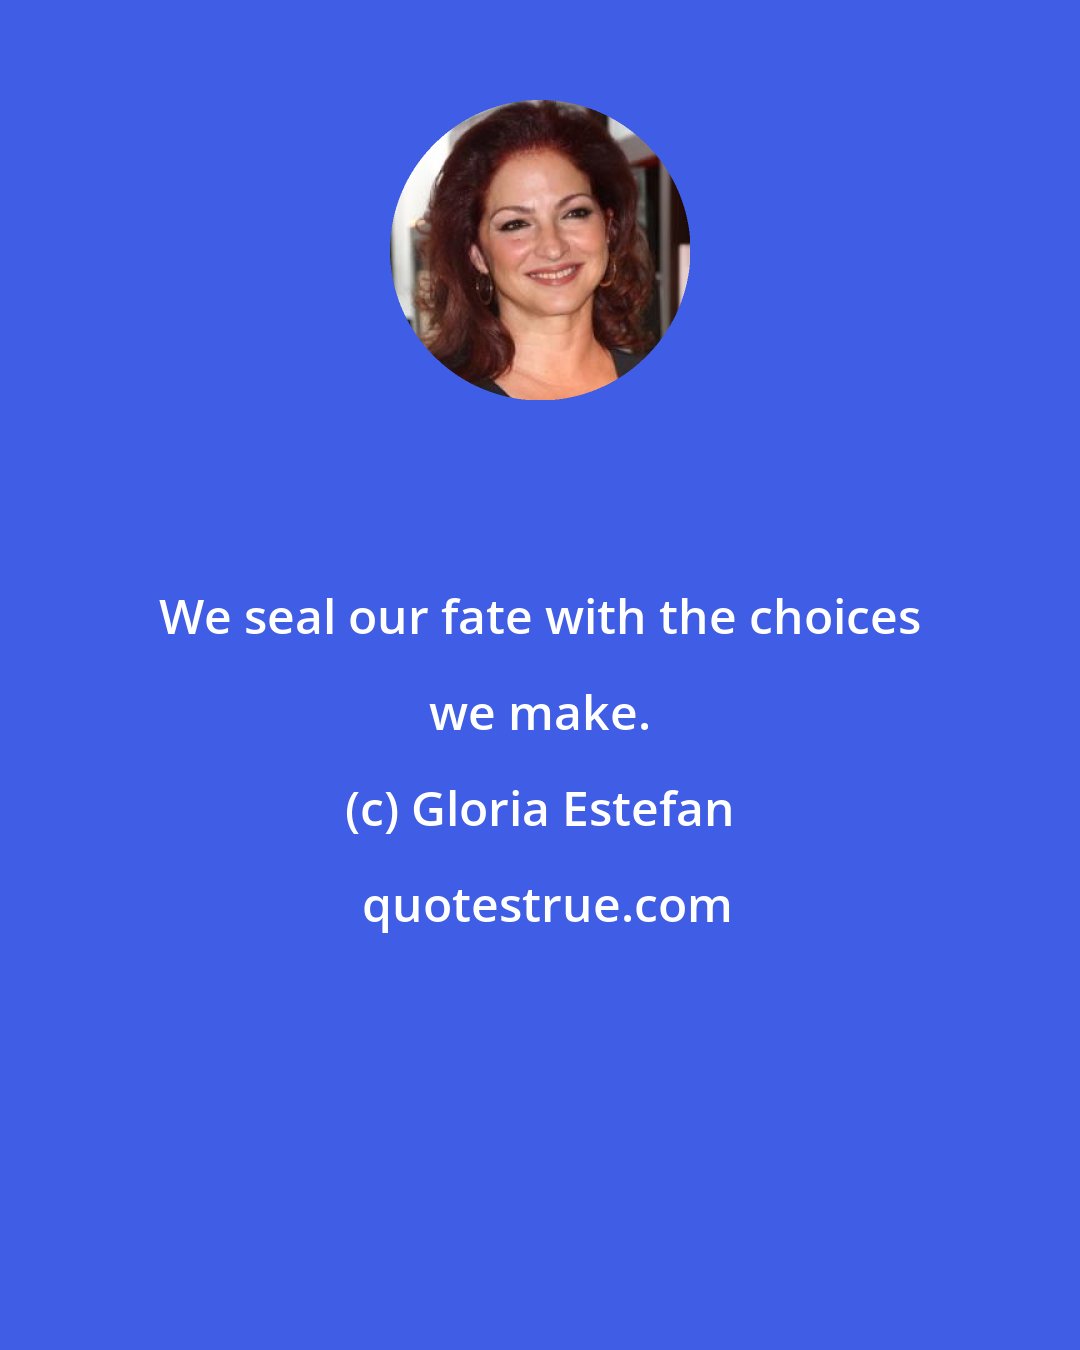 Gloria Estefan: We seal our fate with the choices we make.